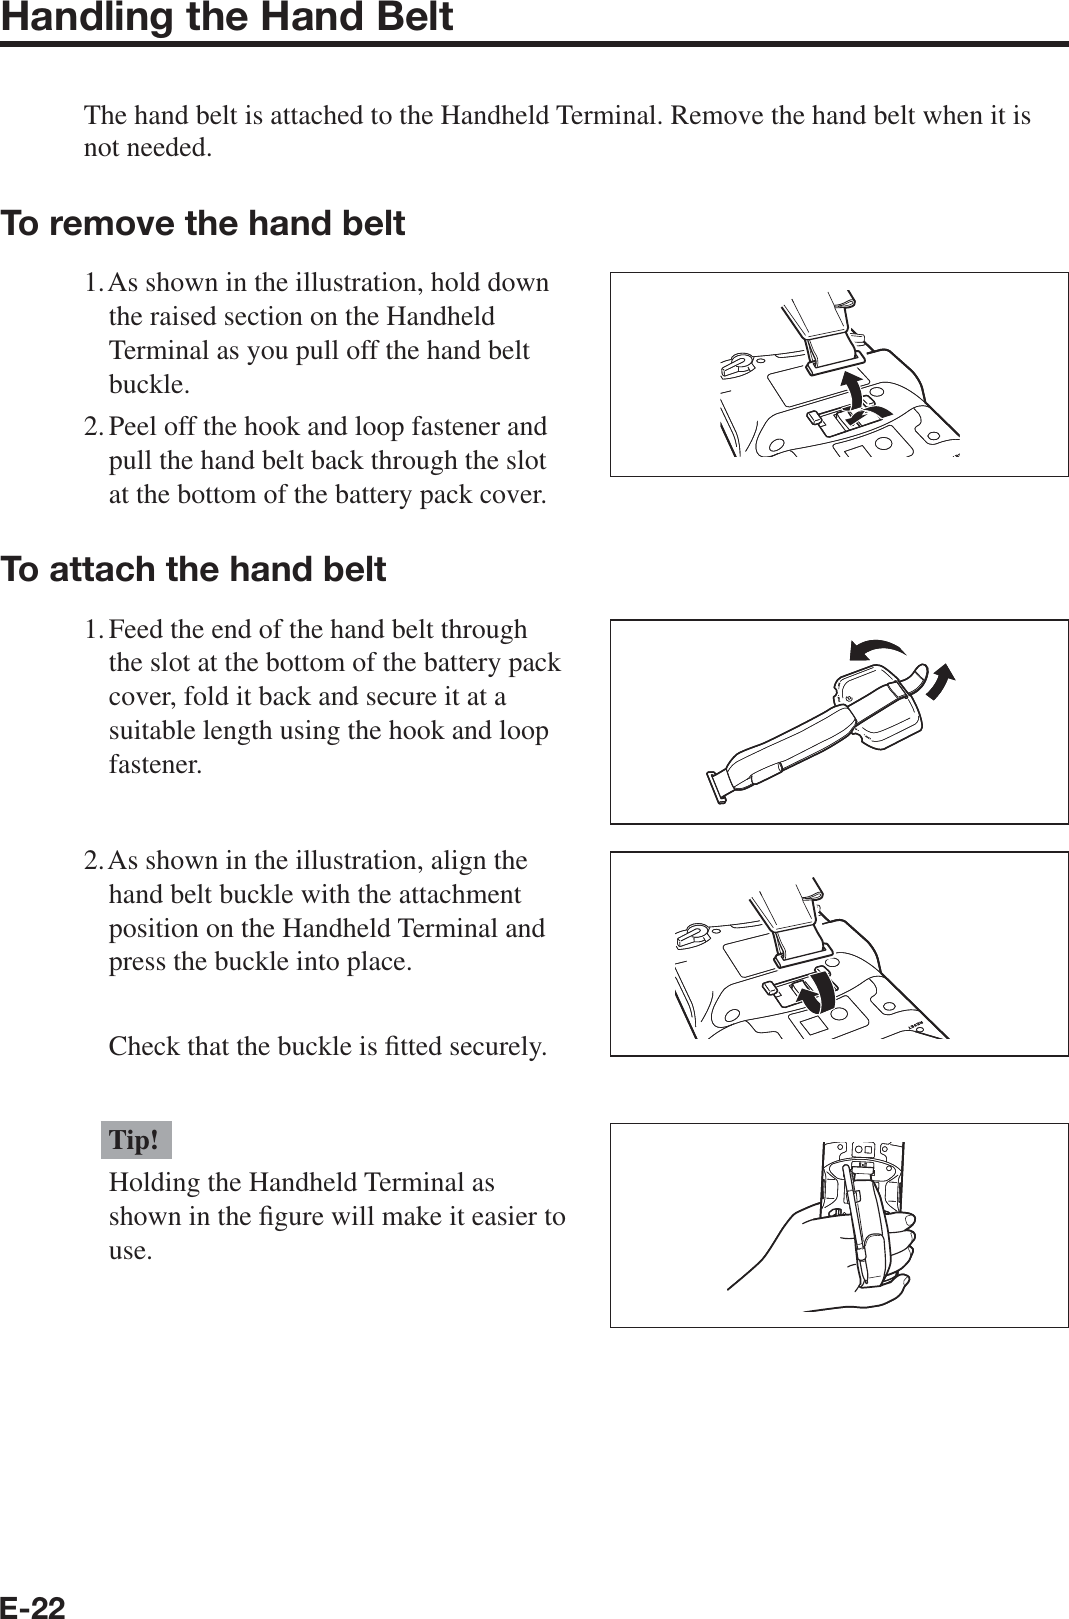 E-22Handling the Hand BeltThe hand belt is attached to the Handheld Terminal. Remove the hand belt when it is not needed.To remove the hand belt1. As shown in the illustration, hold down the raised section on the Handheld Terminal as you pull off the hand belt buckle.2. Peel off the hook and loop fastener and pull the hand belt back through the slot at the bottom of the battery pack cover.To attach the hand belt1. Feed the end of the hand belt through the slot at the bottom of the battery pack cover, fold it back and secure it at a suitable length using the hook and loop fastener.2. As shown in the illustration, align the hand belt buckle with the attachment position on the Handheld Terminal and press the buckle into place.  Check that the buckle is ¿ tted securely.Tip!Holding the Handheld Terminal as shown in the ¿ gure will make it easier to use.